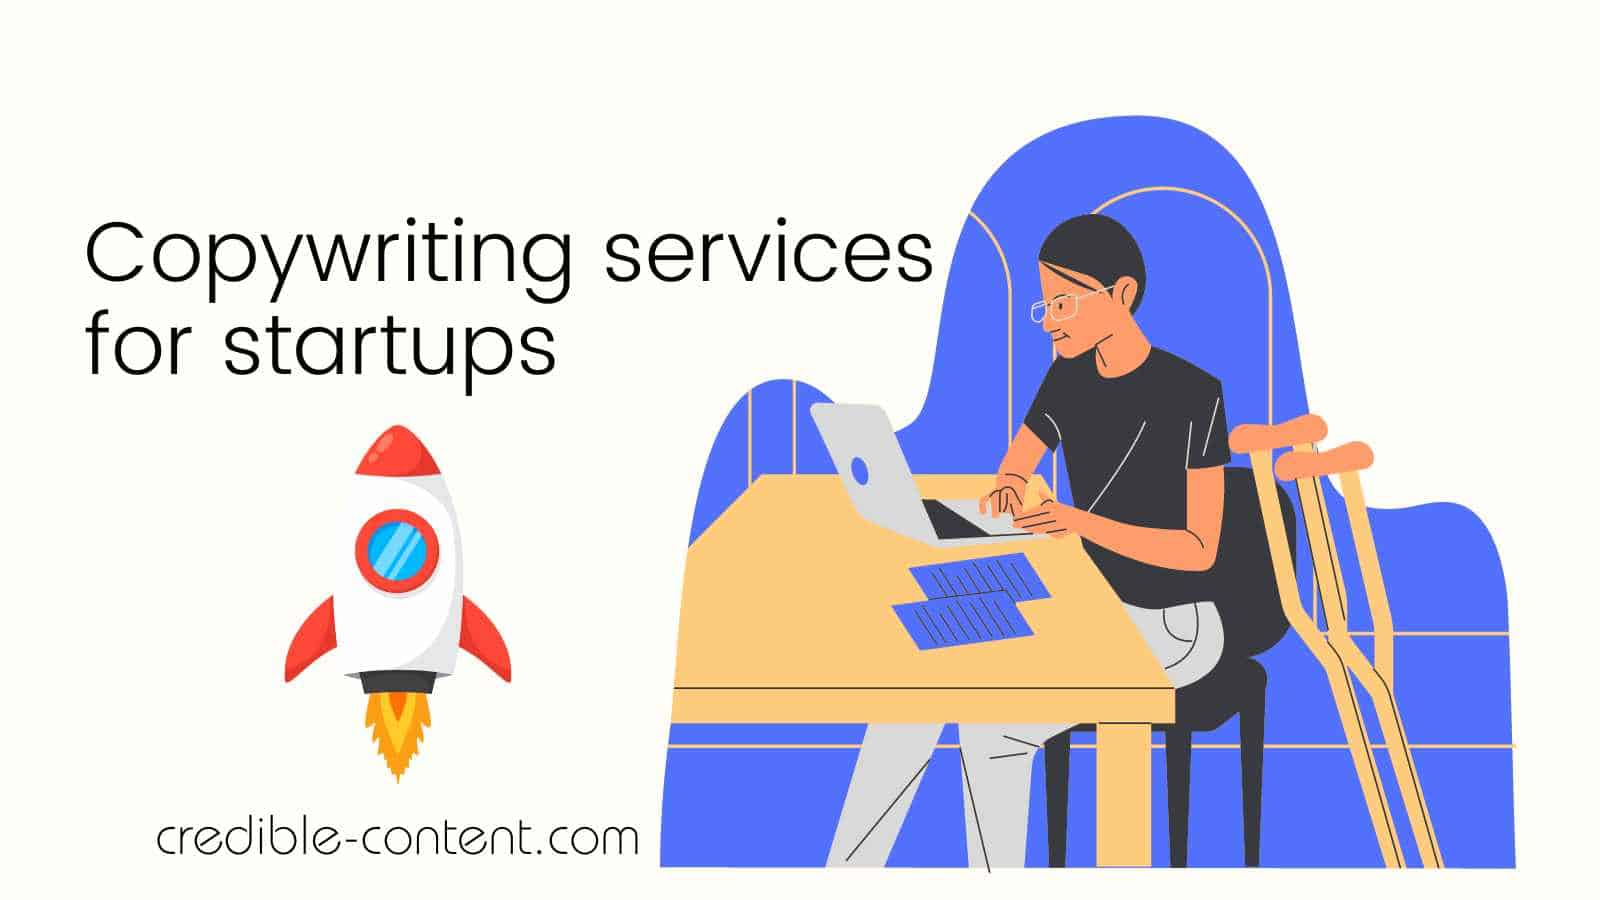 Copywriting services for startups